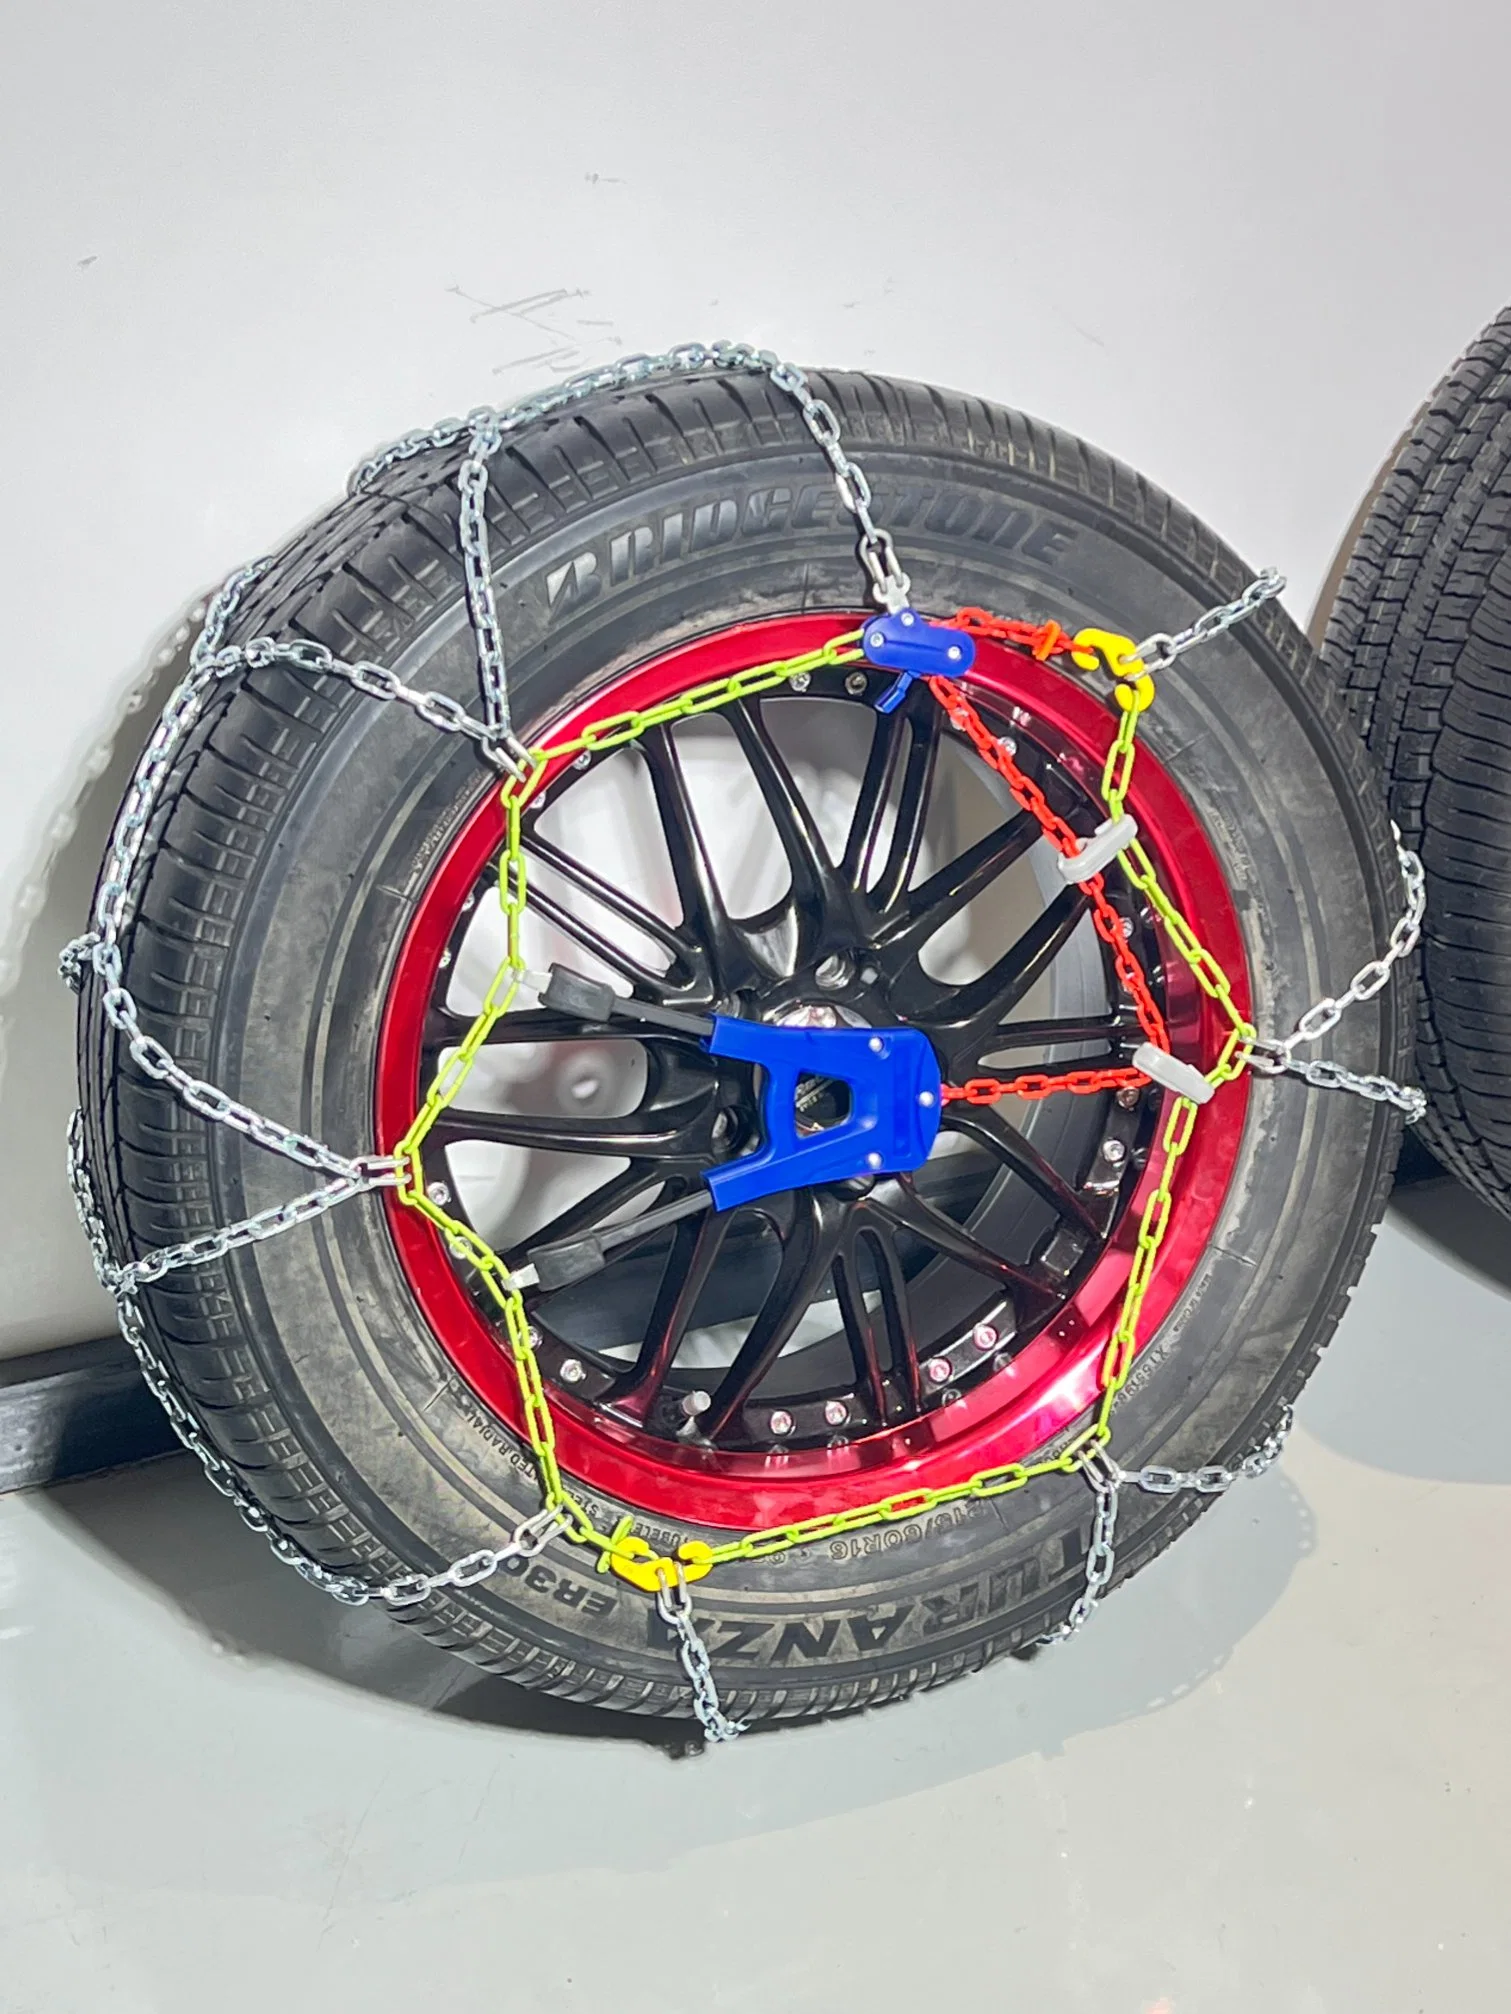 Snow Chains Tire Chains for Passenger Cars, Suvs, Tractor, Trucks, ATV, Forest